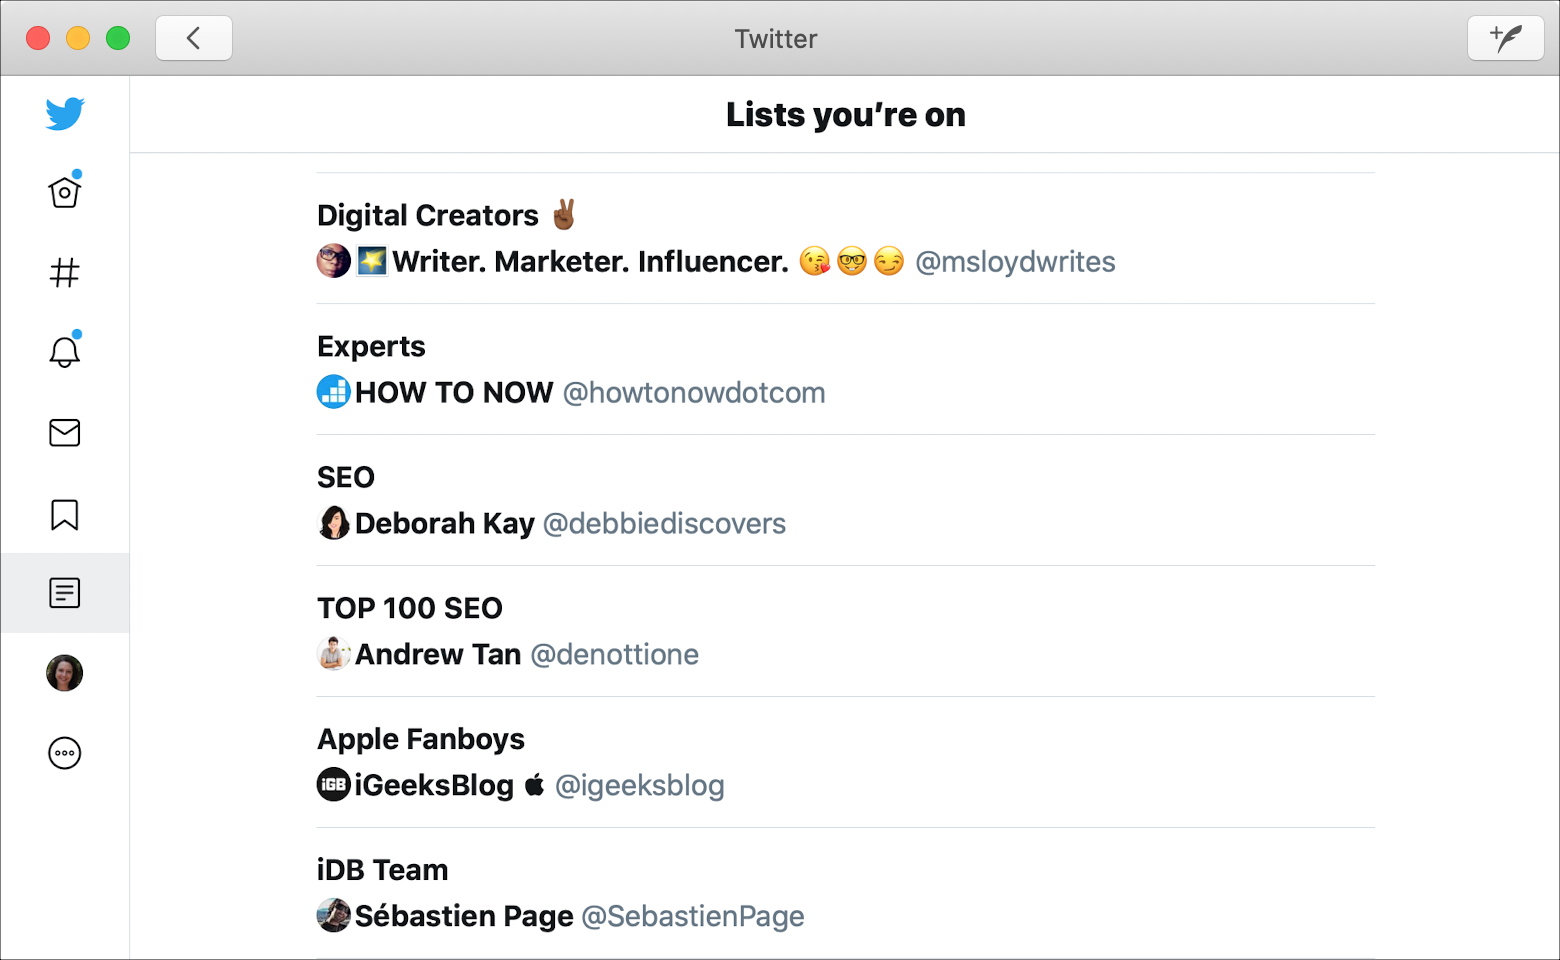 Twitter List of Lists Youre On Mac